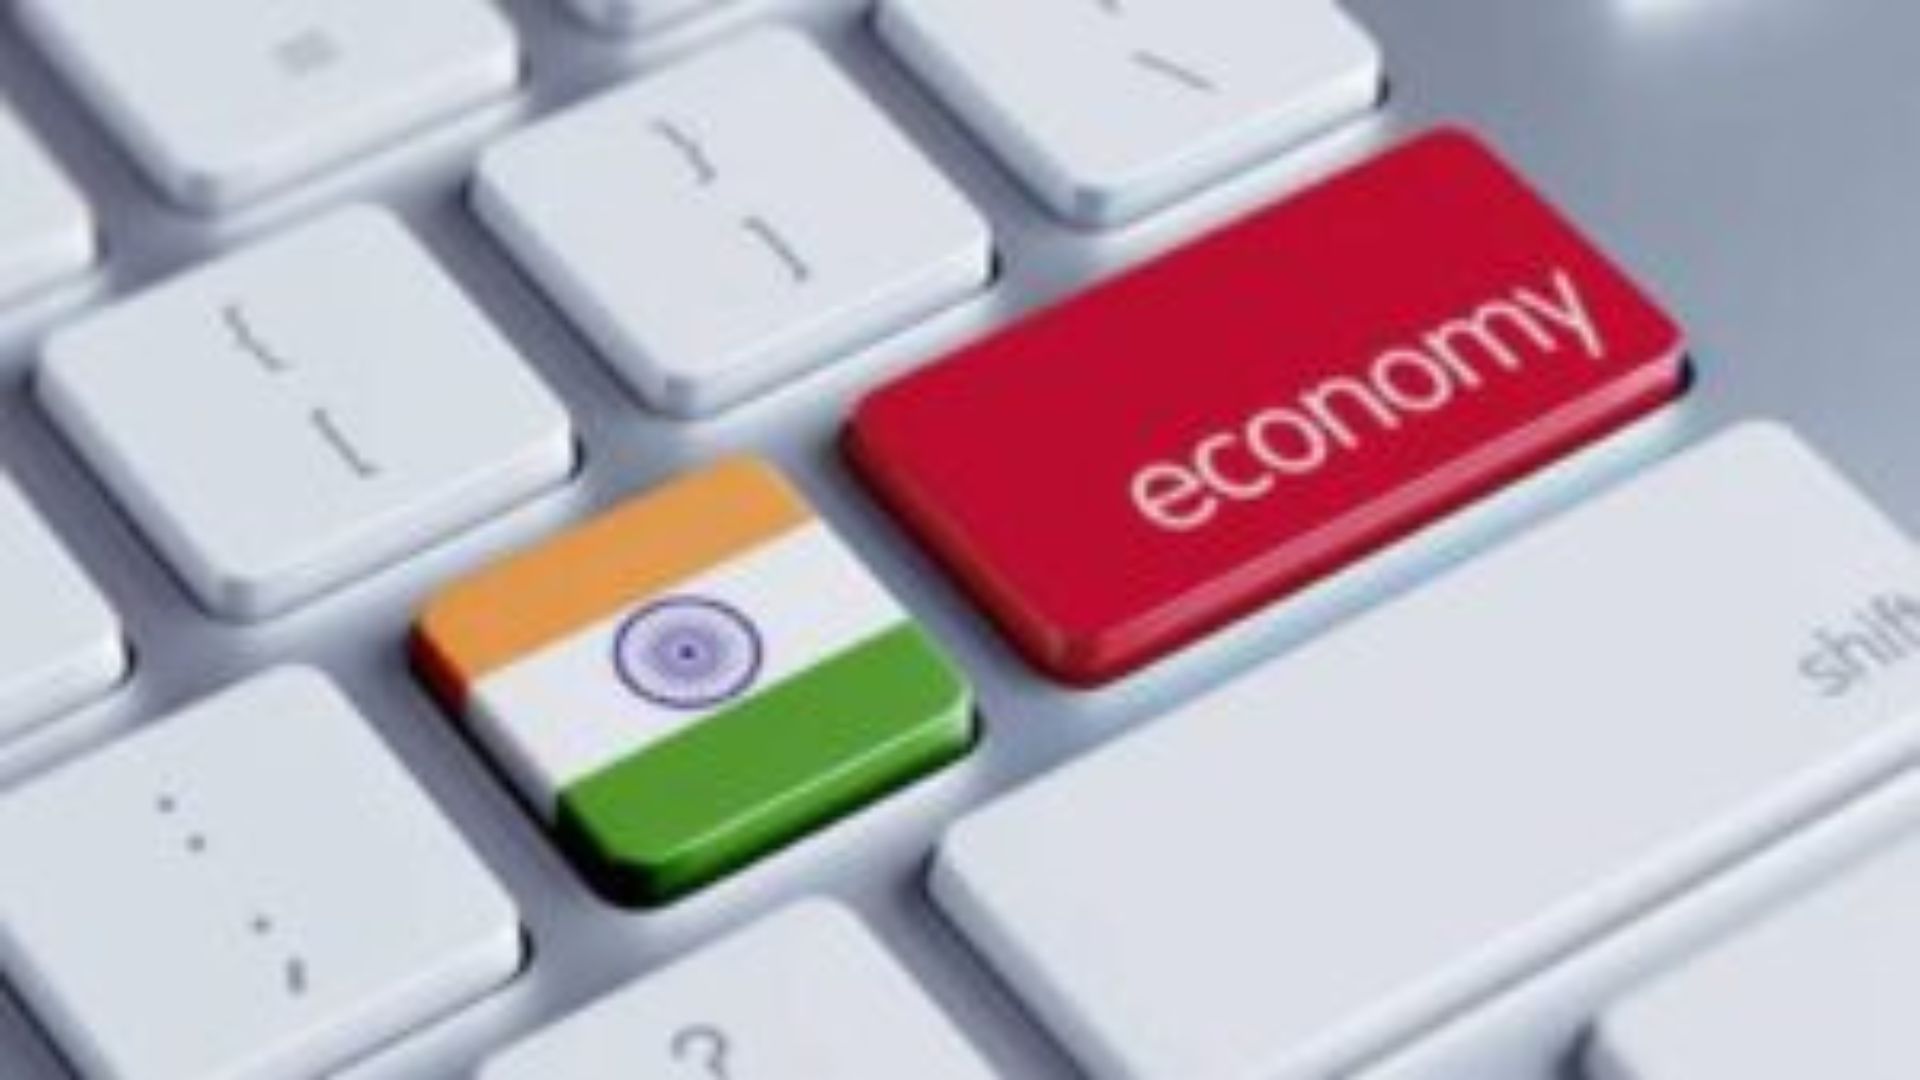 Robust growth, Govt capex positive, poll outcome not to deter reforms